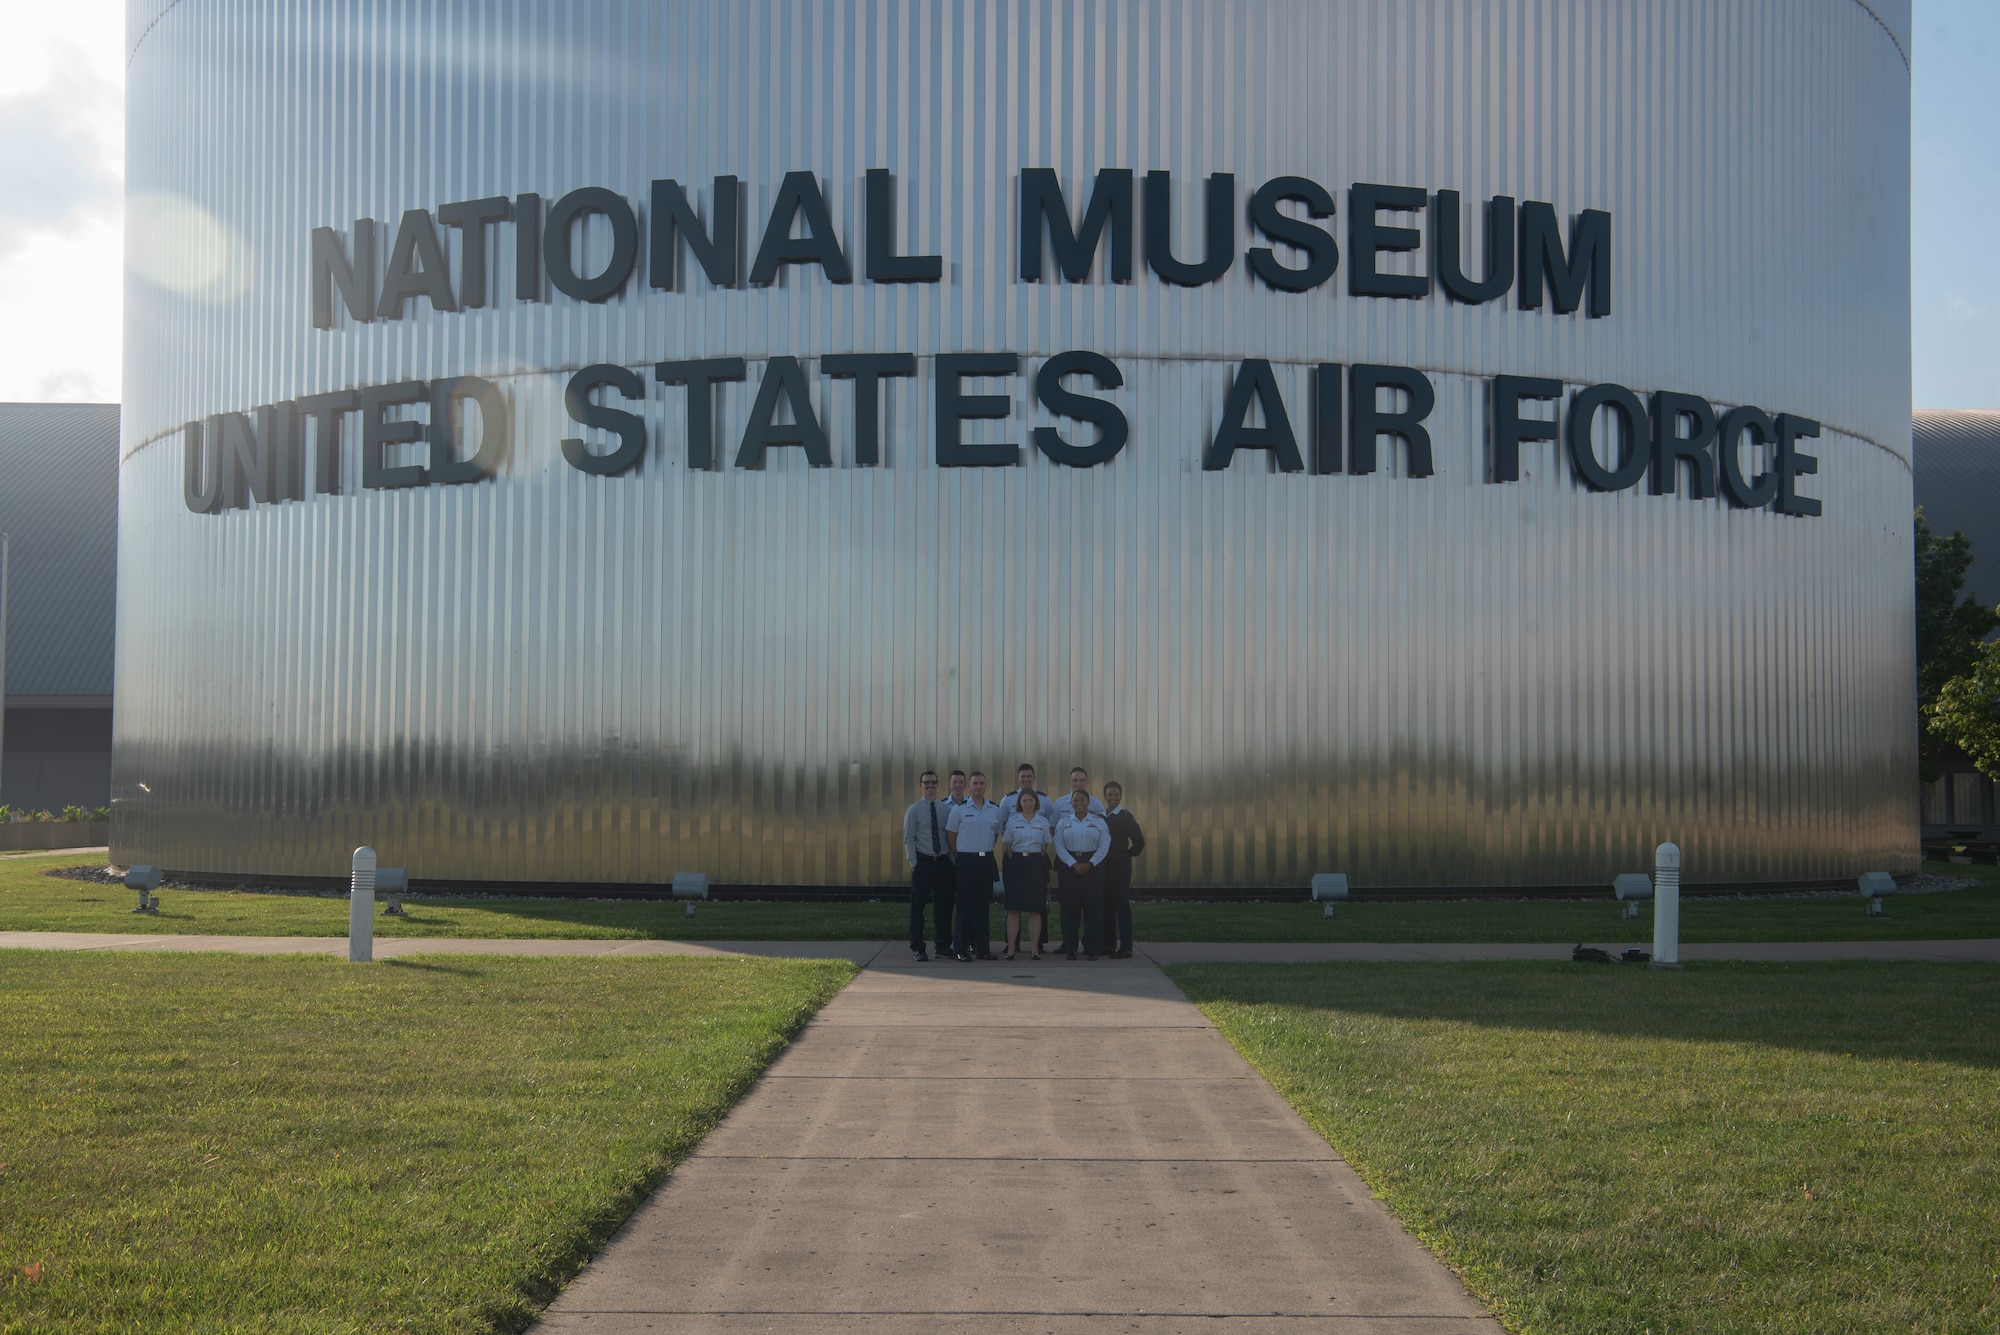 Airmen from F.E. Warren Air Force Base, Wyo., visit The National Museum of the U.S. Air Force Sept. 4, 2019, at Wright-Patterson Air Force Base, Ohio. The 90th Missile Wing Airmen visited the museum in order to gain knowledge on the heritage and teamwork within the ICBM mission. (U.S. Air Force photo by Senior Airman Abbigayle Williams)